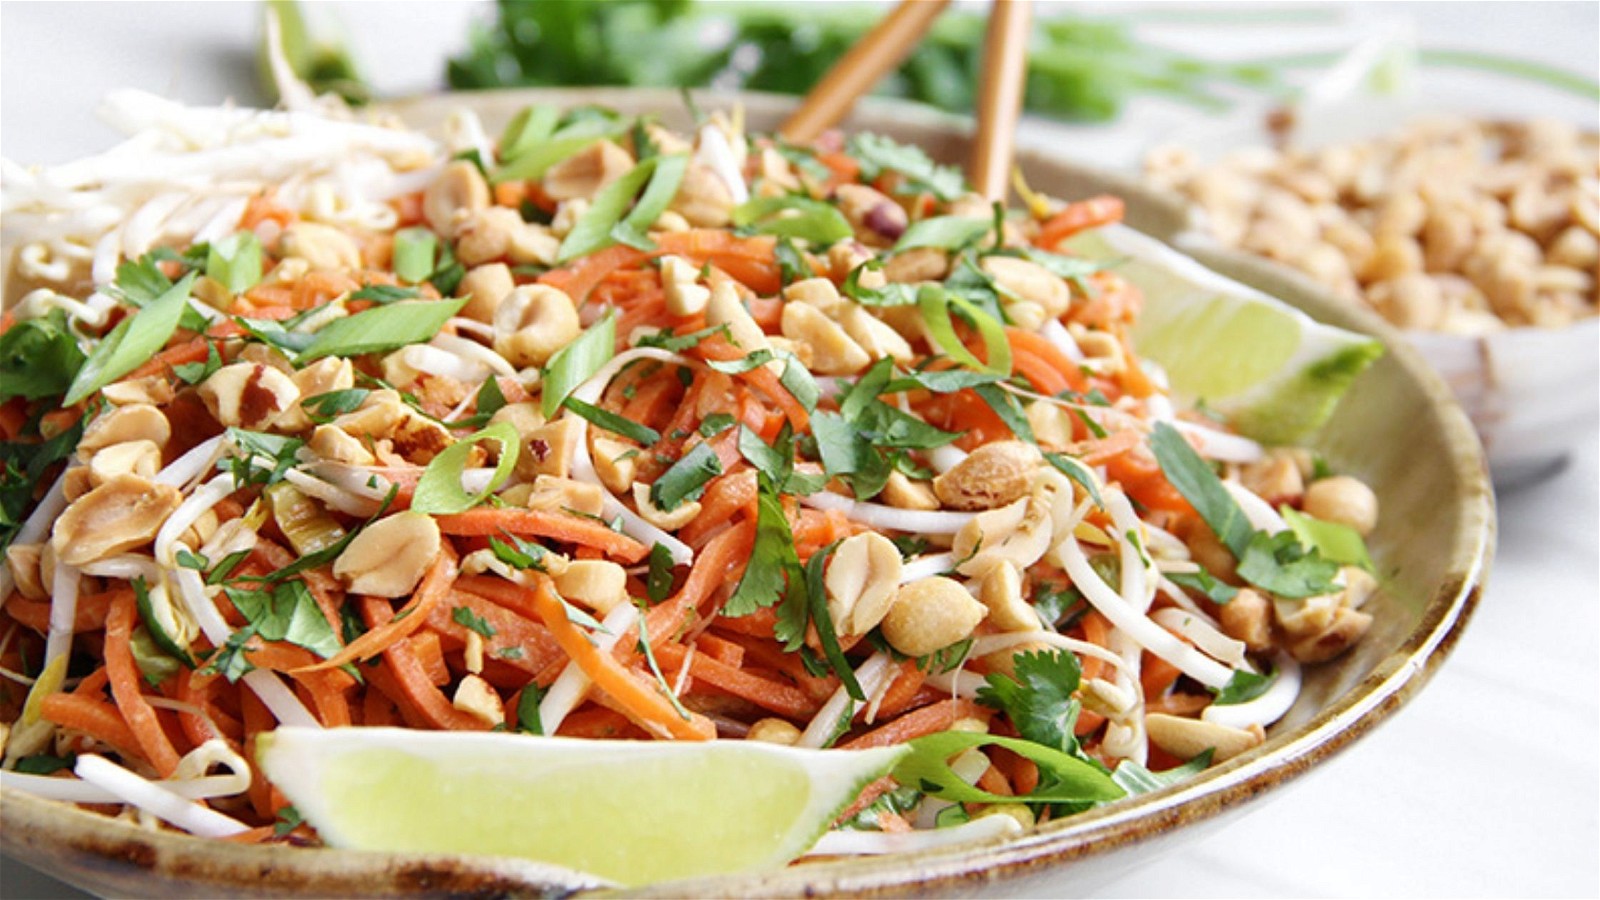 Image of Carrot Noodle Pad Thai